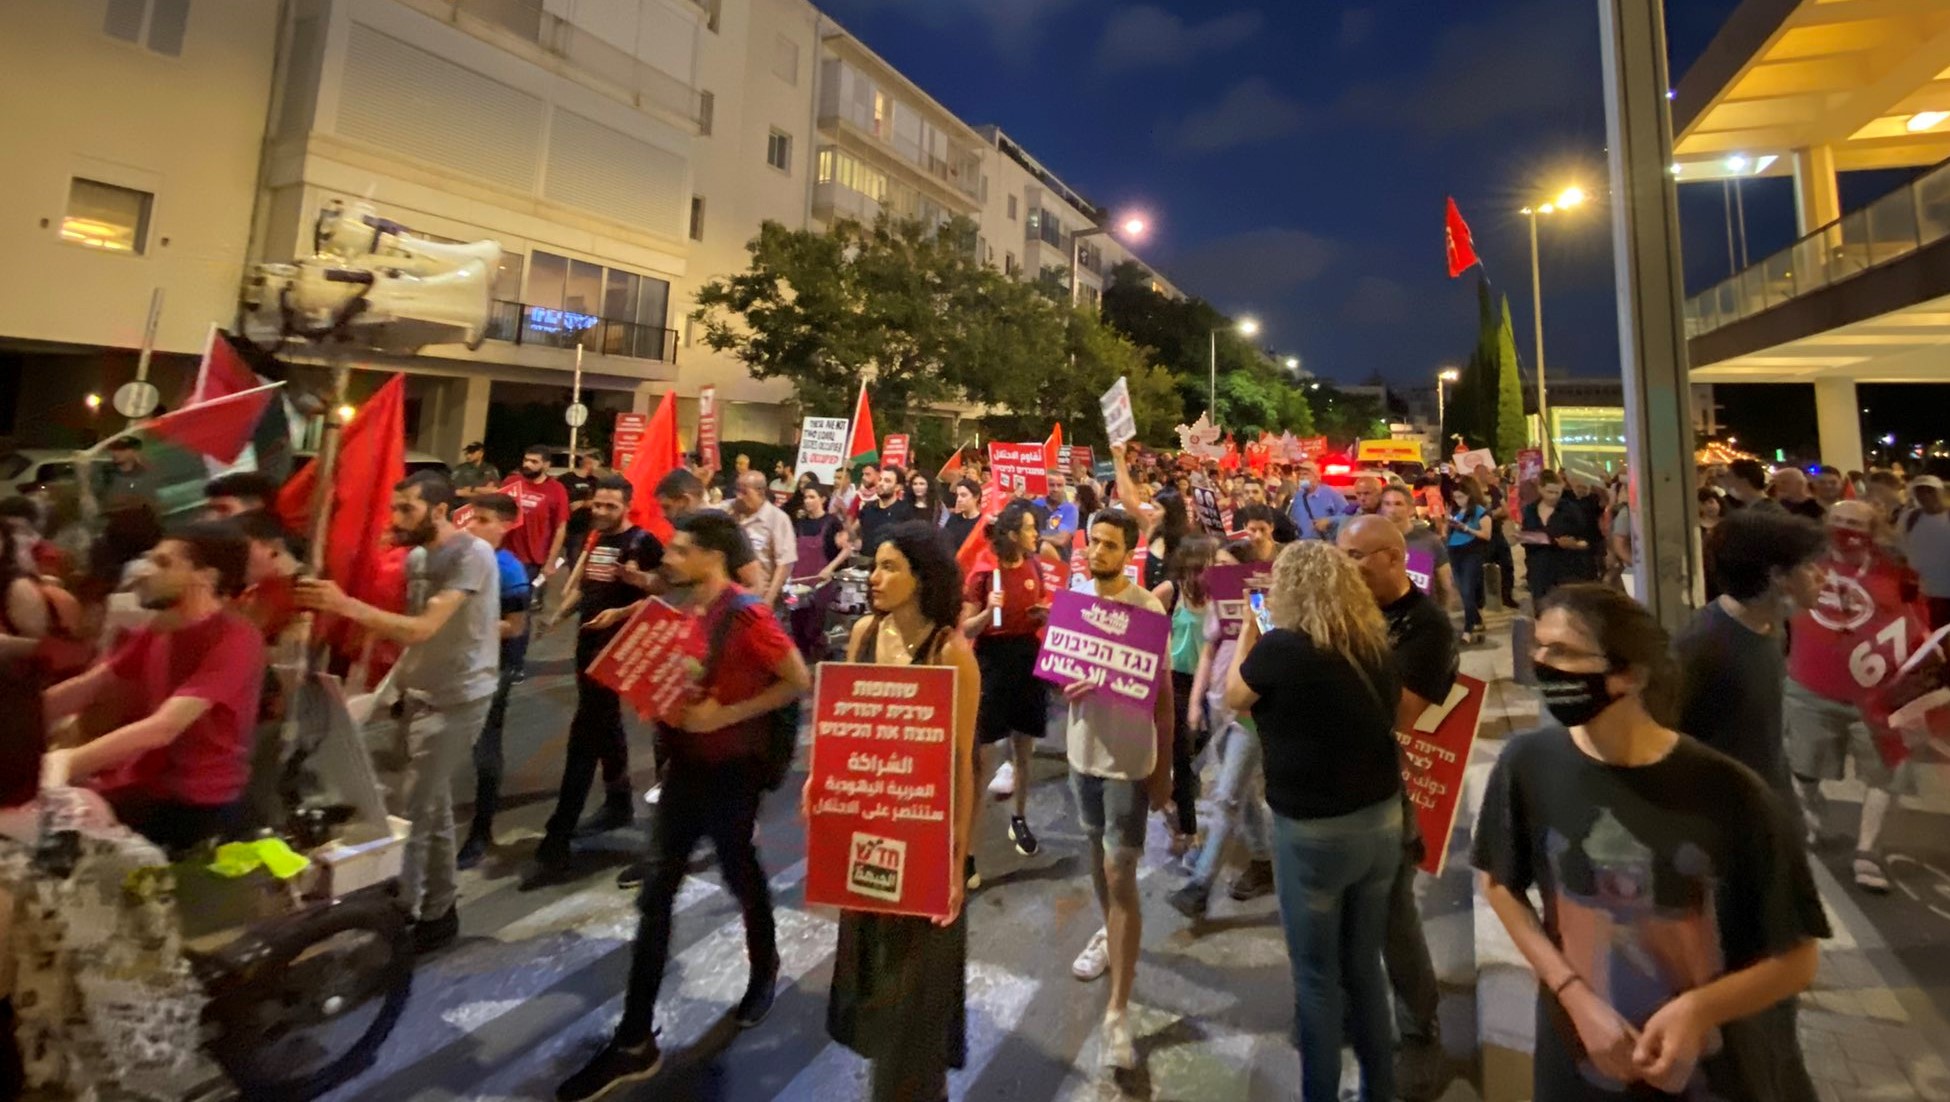 Jewish-Arab demonstration against the occupation in Central Tel -Aviv to mark more than half a century of Israeli rule of the Palestinian territories, June 5, 2021